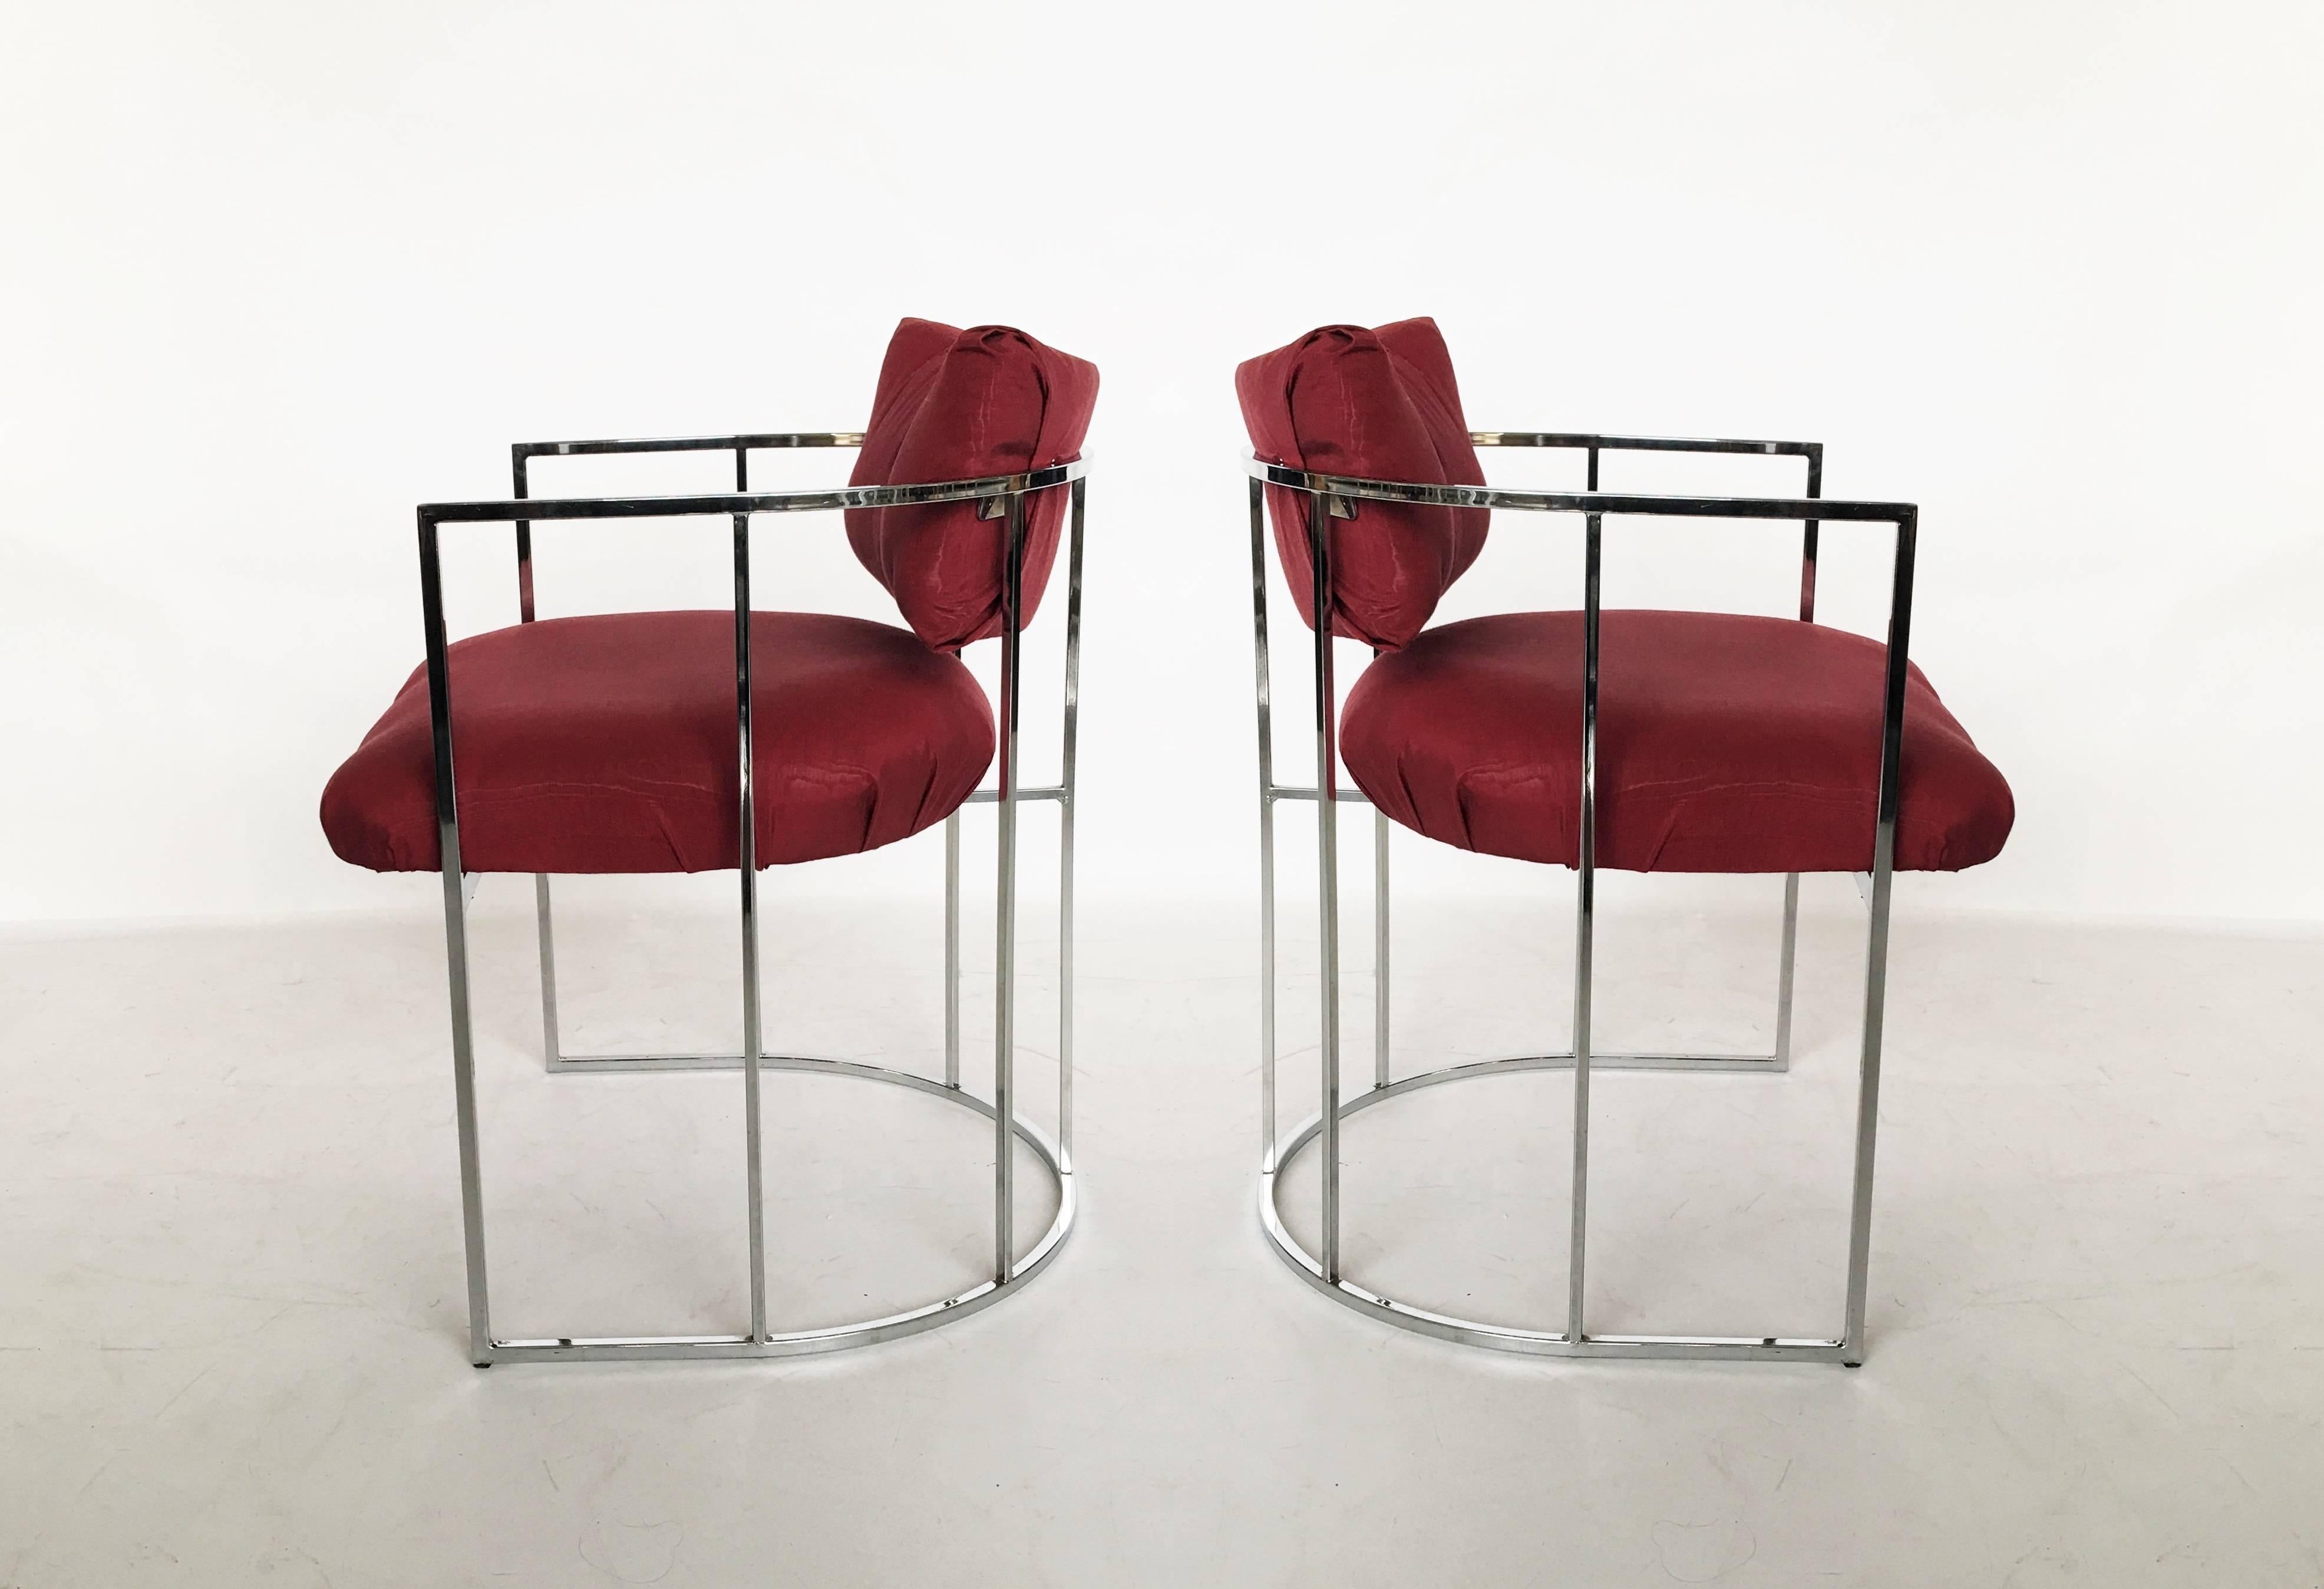 Four chrome Milo Baughman dining chairs for Thayer Coggin. Feature unique ellipse chrome frames with thick padded seating and a tufted floating backrest. Chrome is excellent. Upholstery is recommended.